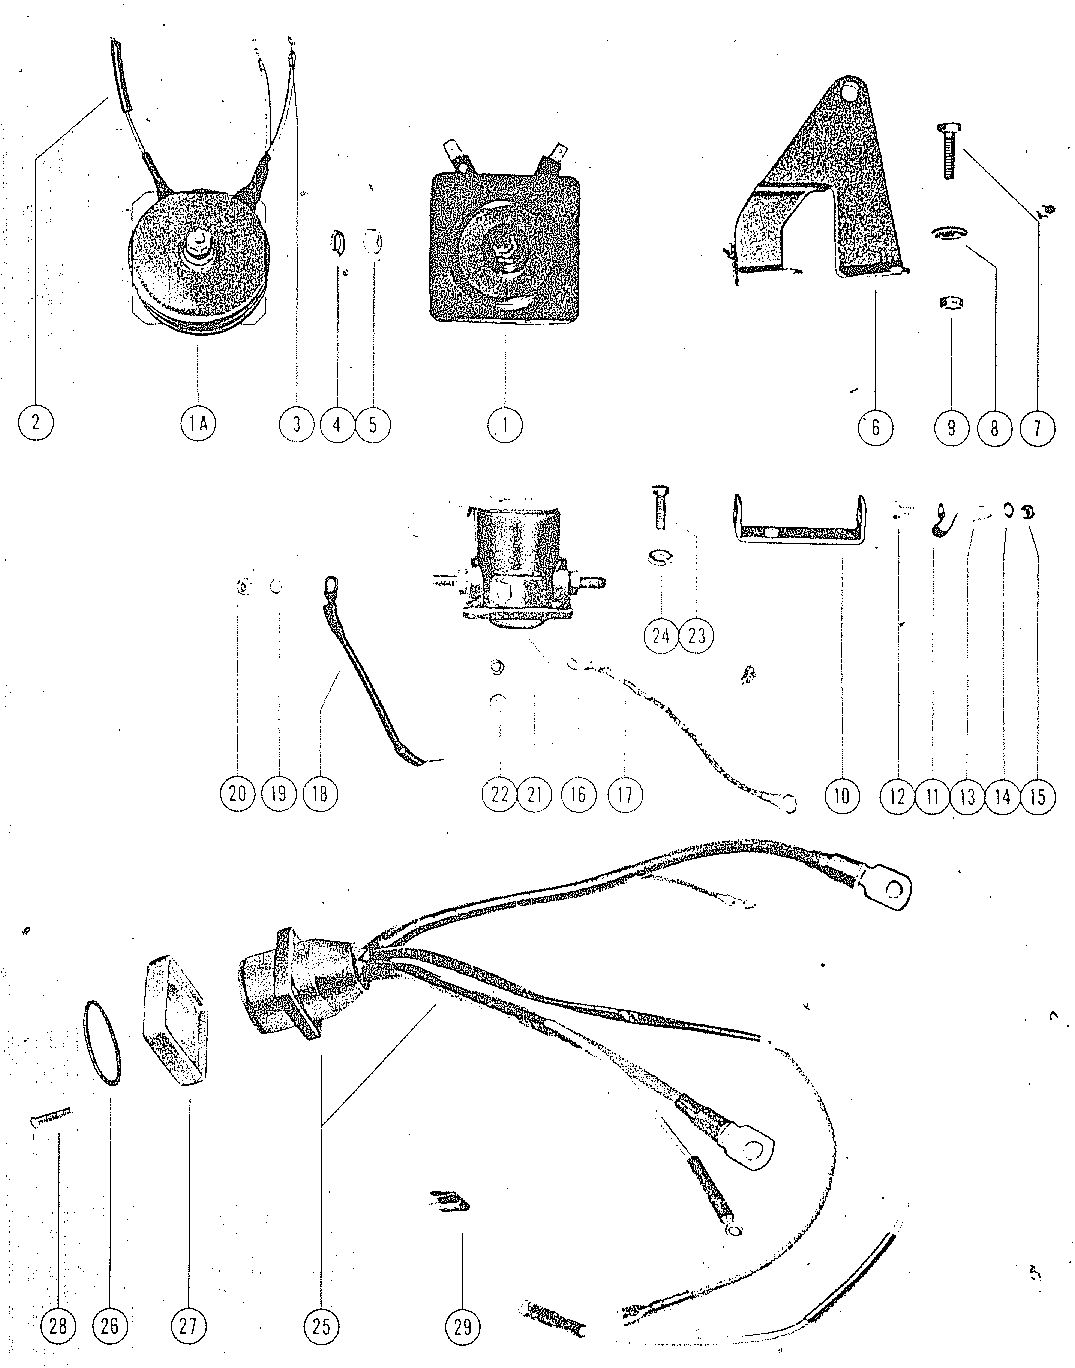 MARK MARK 58, MARK 55A, MARK 58A RECTIFIER, STARTER SOLENOID AND WIRING HARNESS